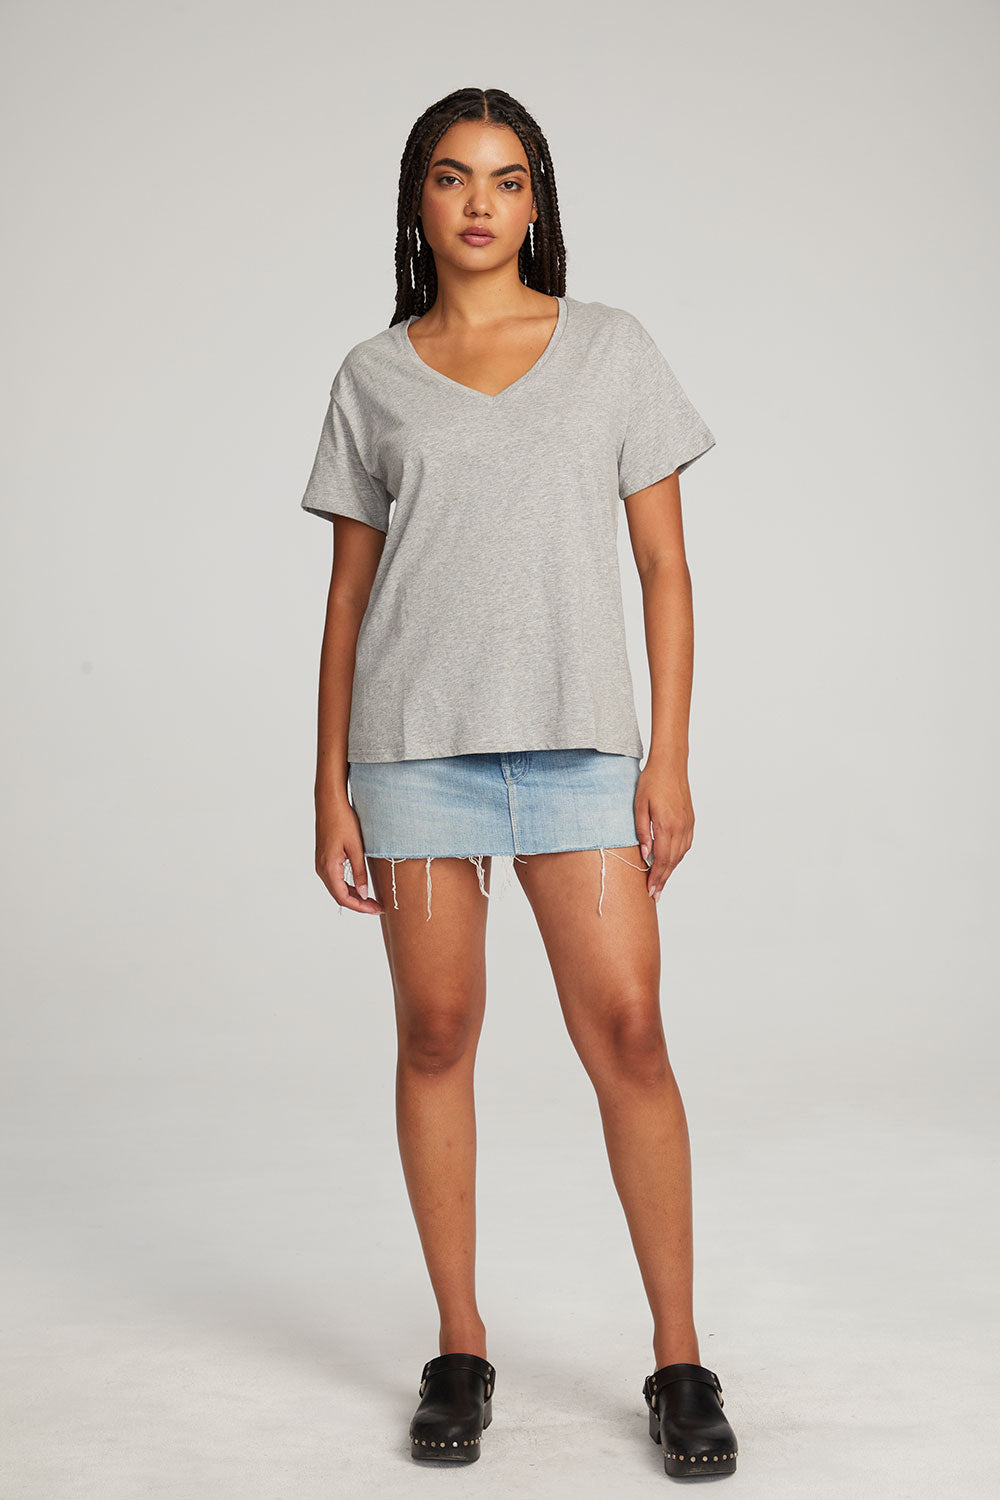 Everyday Essential V-neck Tee WOMENS chaserbrand